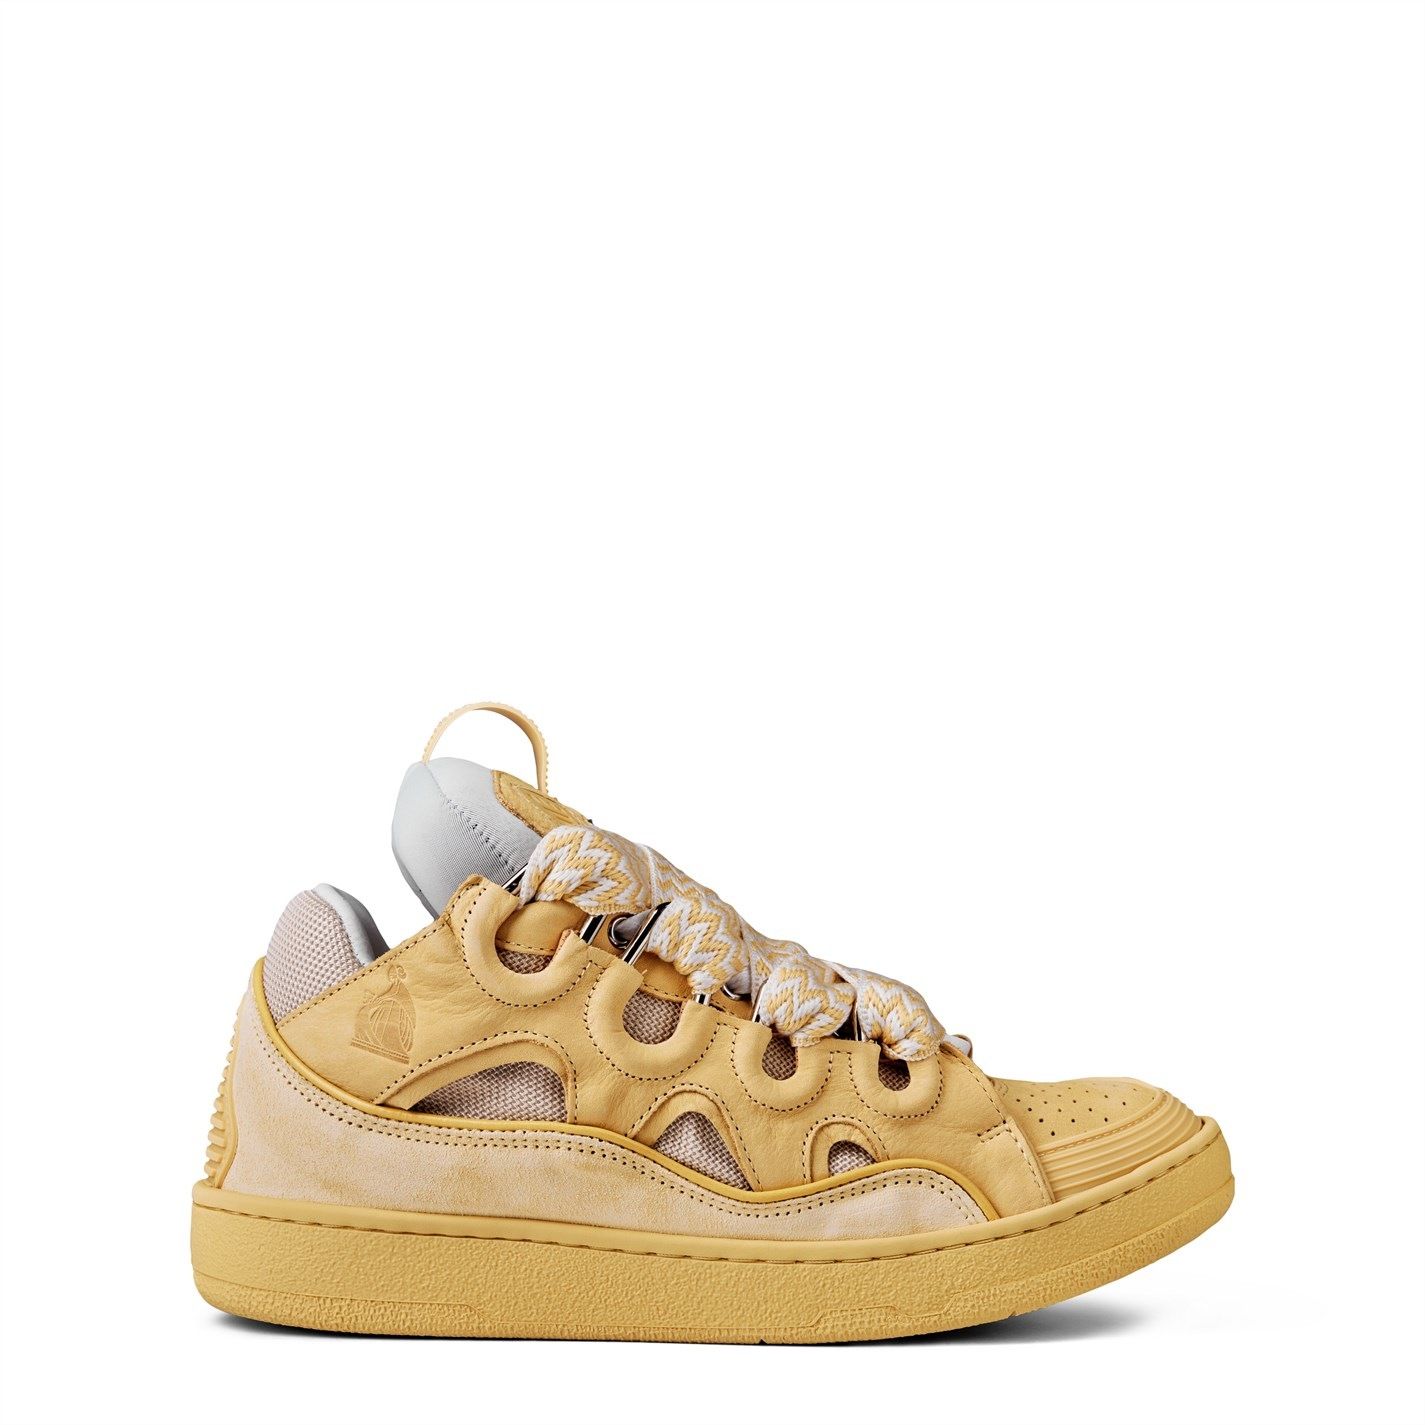 Lanvin Curb Sneakers in Yellow